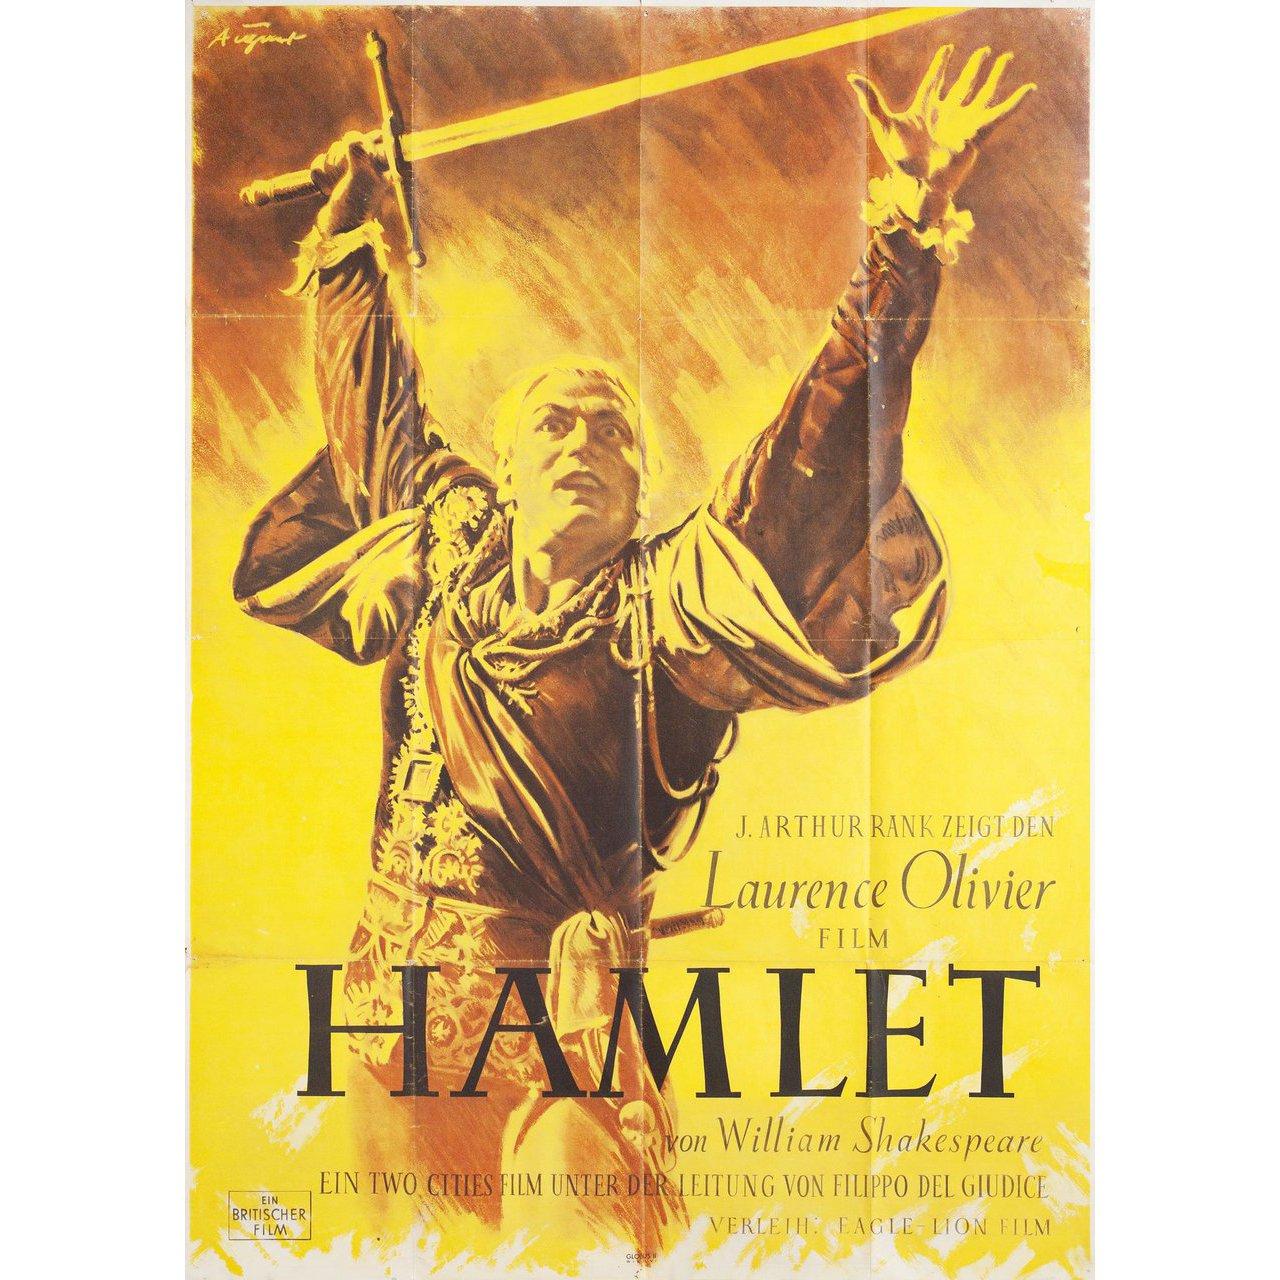 Original 1948 Austrian A0 poster for the film Hamlet directed by Laurence Olivier with Laurence Olivier / Jean Simmons / John Laurie / Esmond Knight / Anthony Quayle / Niall MacGinnis. Very good condition, folded with pinholes and other wear. Many